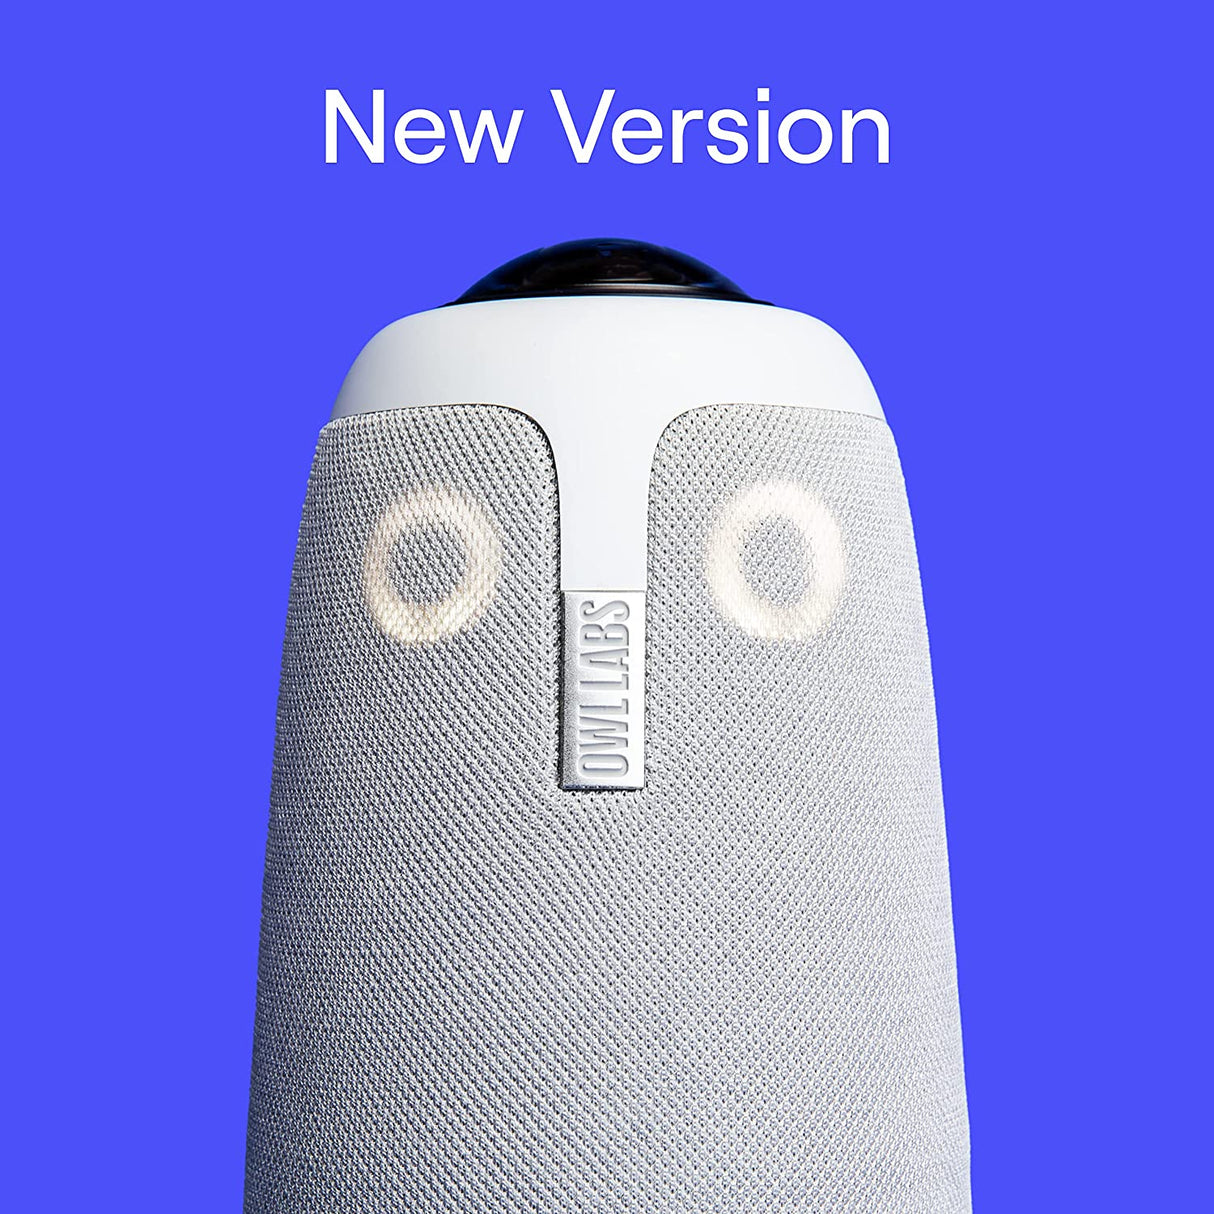 Owl labs Meeting Owl 3 (Next Gen) 360-Degree, 1080p HD Smart Video Conference Camera, Microphone, and Speaker (Automatic Speaker Focus &amp; Smart Zooming) Meeting Owl 3 - Next Gen